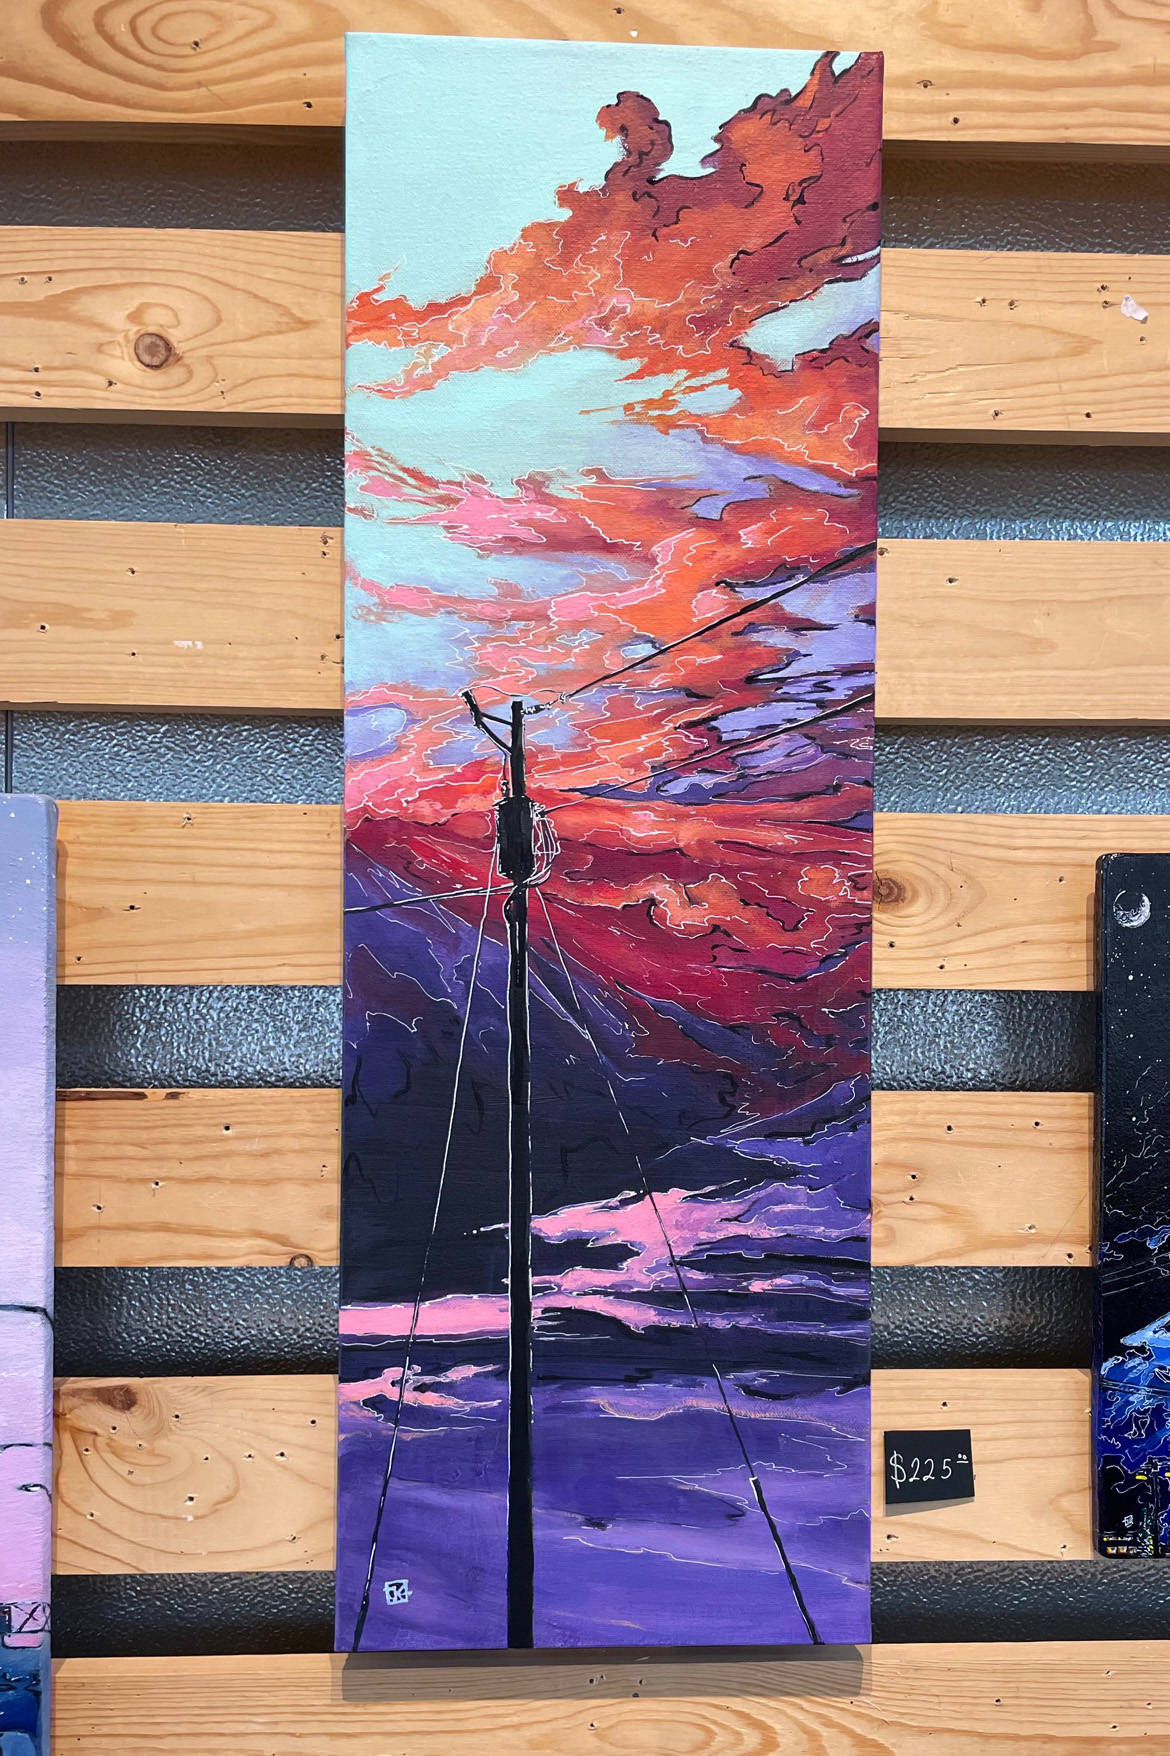 Reds and oranges spread across a sky painted by Jenna Gerrety, of Homer. Taking center stage, a power pole brings to mind “the push and pull of man and nature” that inspires the Homer artist. The painting and others by Gerrety are on display during June at Grace Ridge Brewing Company. (Photo by McKibben Jackinsky)